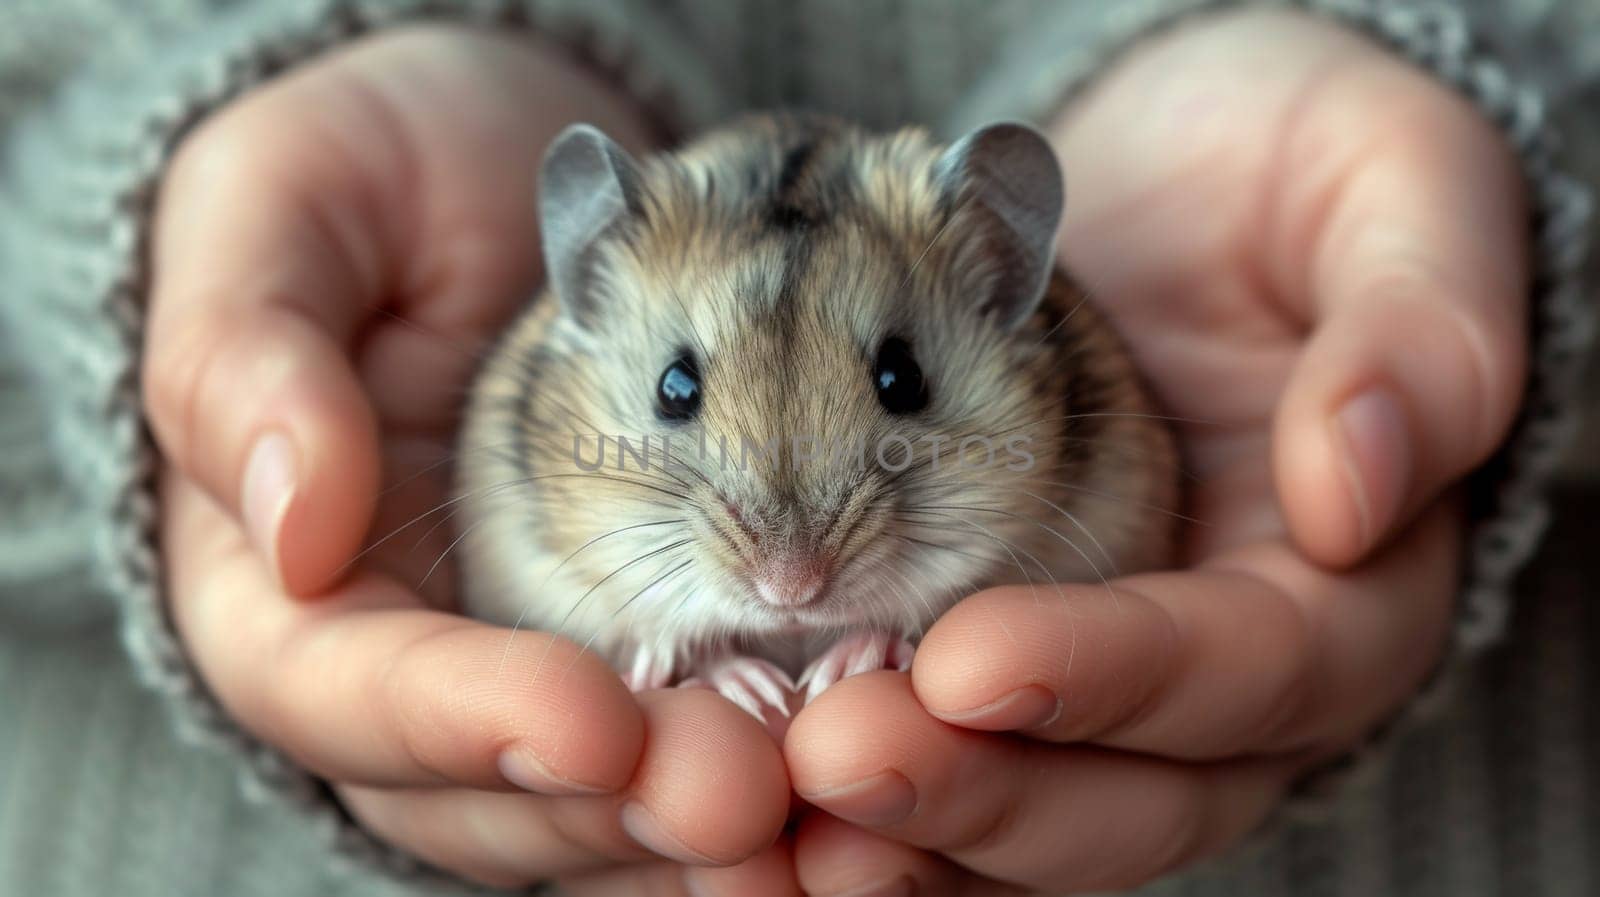 A person holding a small mouse in their hands